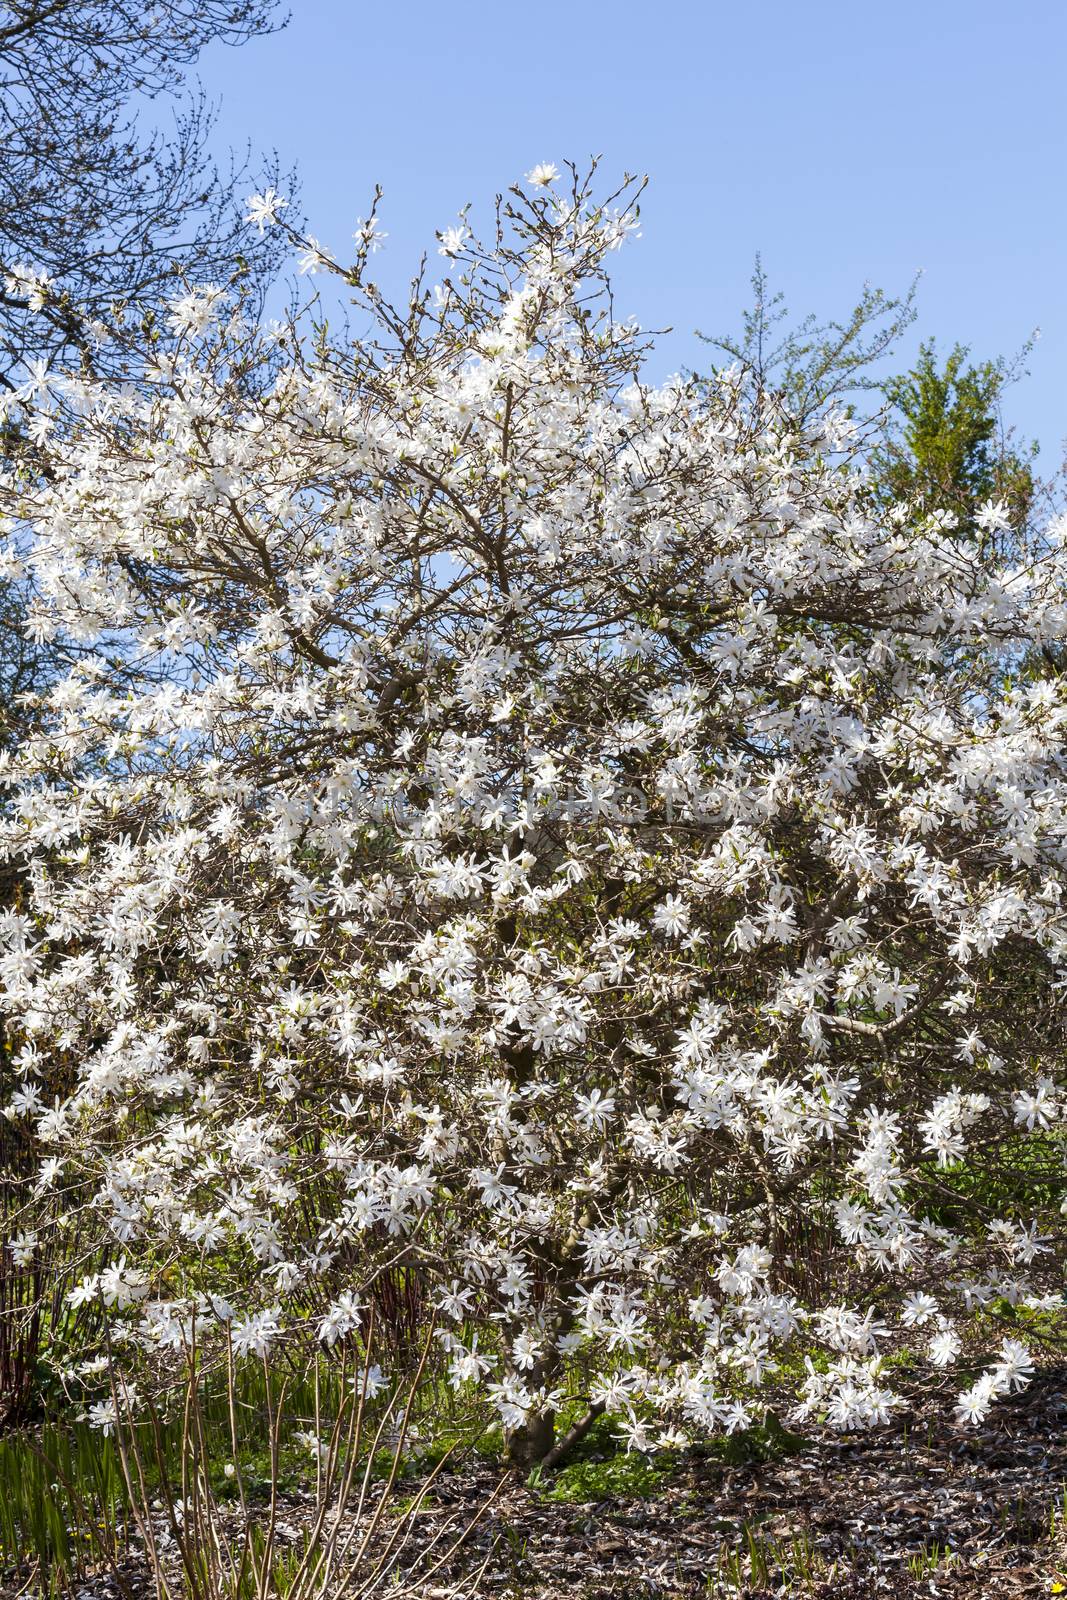 Star magnolia by ant